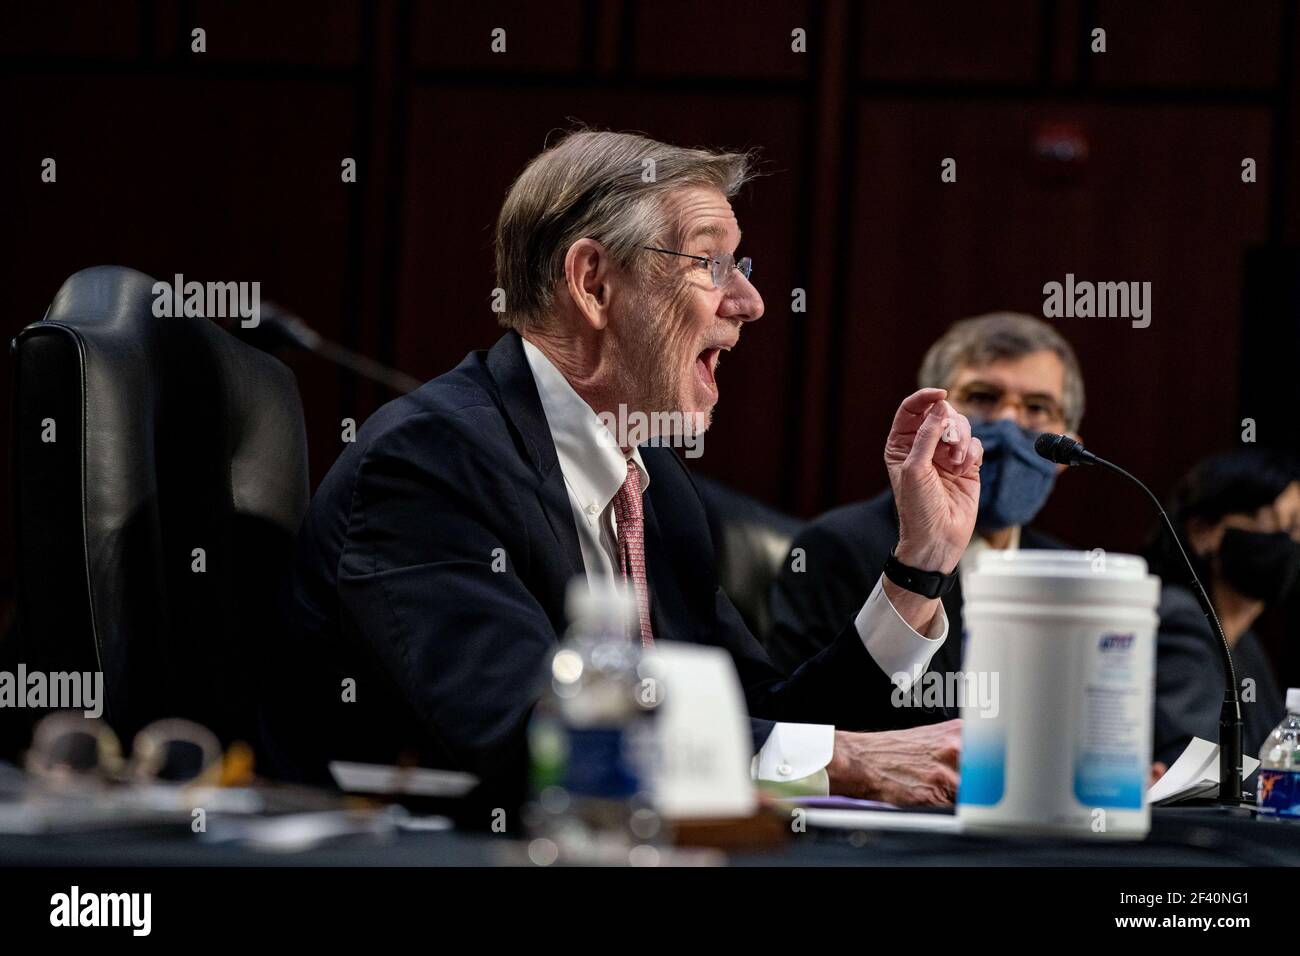 Washington, United States. 18th Mar, 2021. Dr. David Kessler, Chief Science Officer of the White House COVID-19 Response Team speaks during a hearing with the Senate Committee on Health, Education, Labor, and Pensions on the Covid-19 response on Capitol Hill in Washington March 18th, 2021. Pool Photo by Anna Moneymaker/UPI Credit: UPI/Alamy Live News Stock Photo